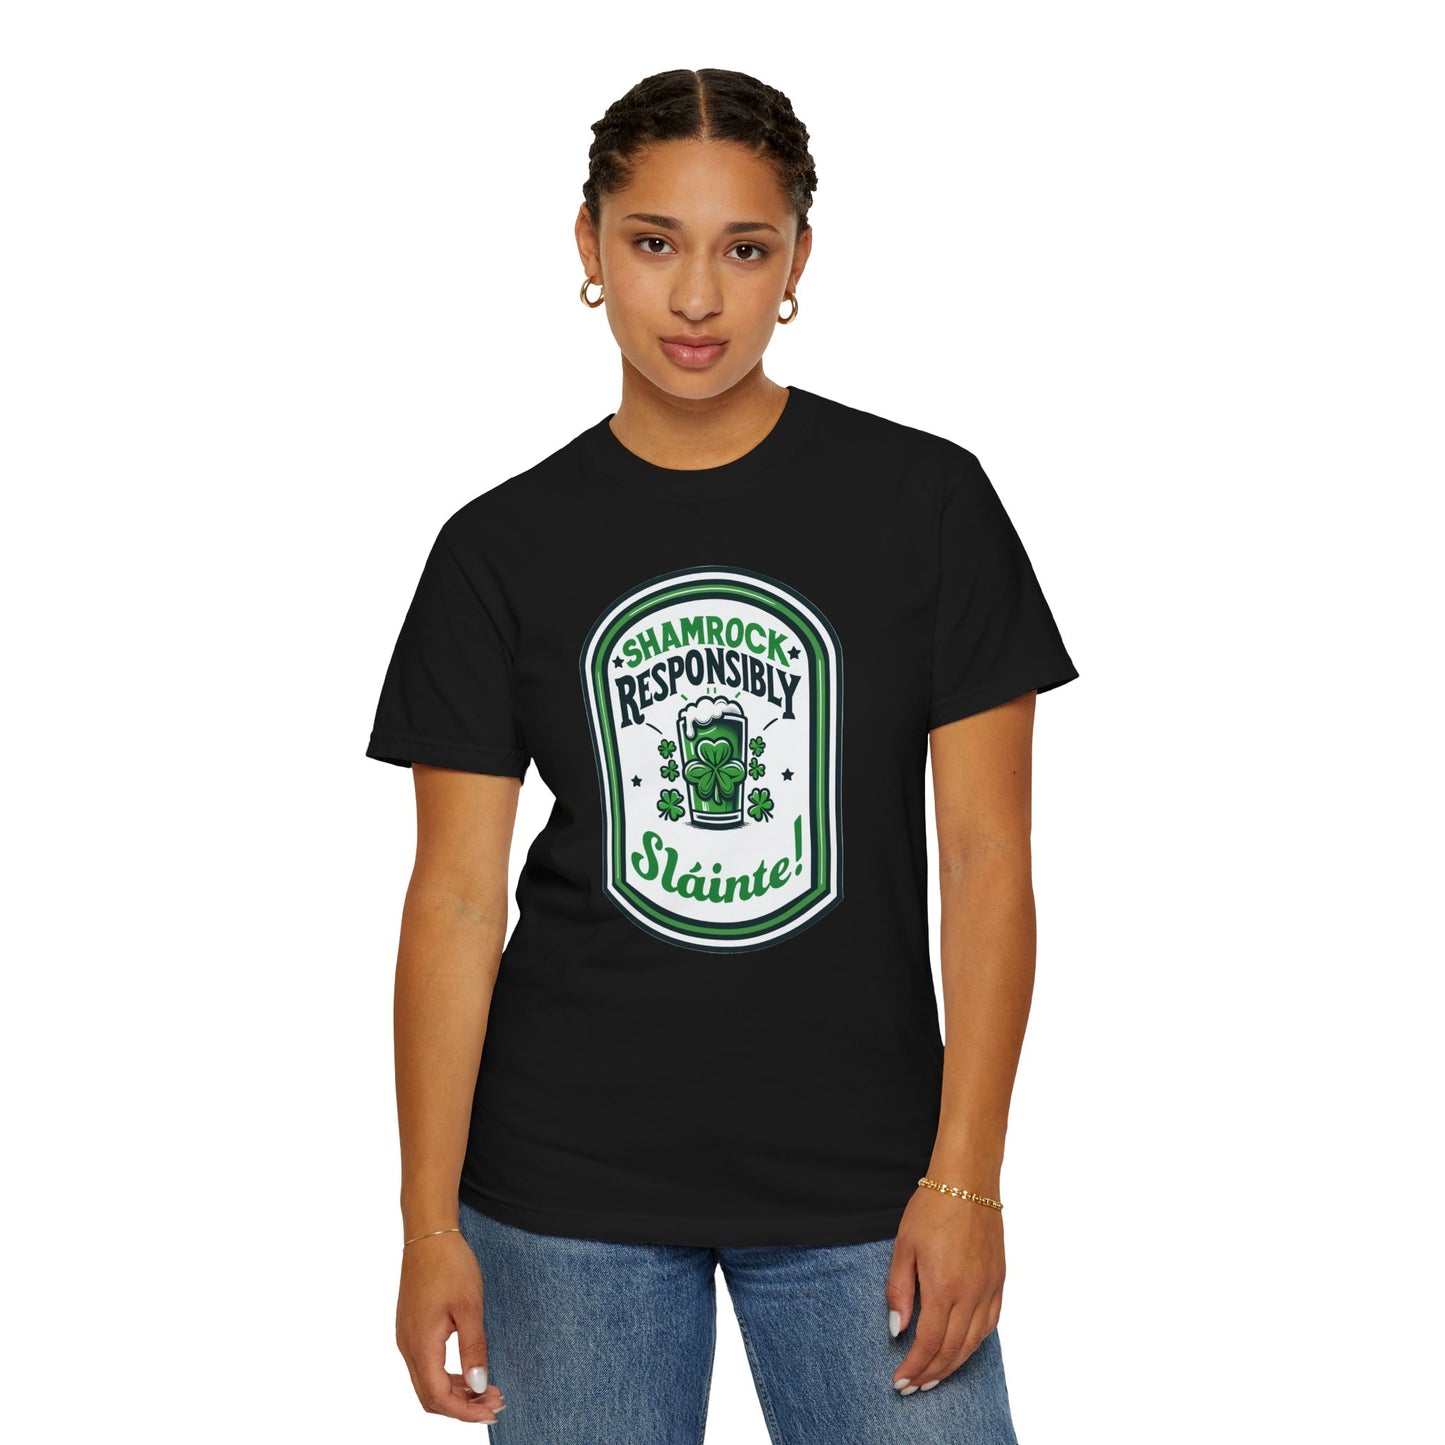 Shamrock Responsibly Slainte Garment-Dyed T-shirt, St. Patrick's Day Tee, Lucky Funny Beer Drinking Shirt